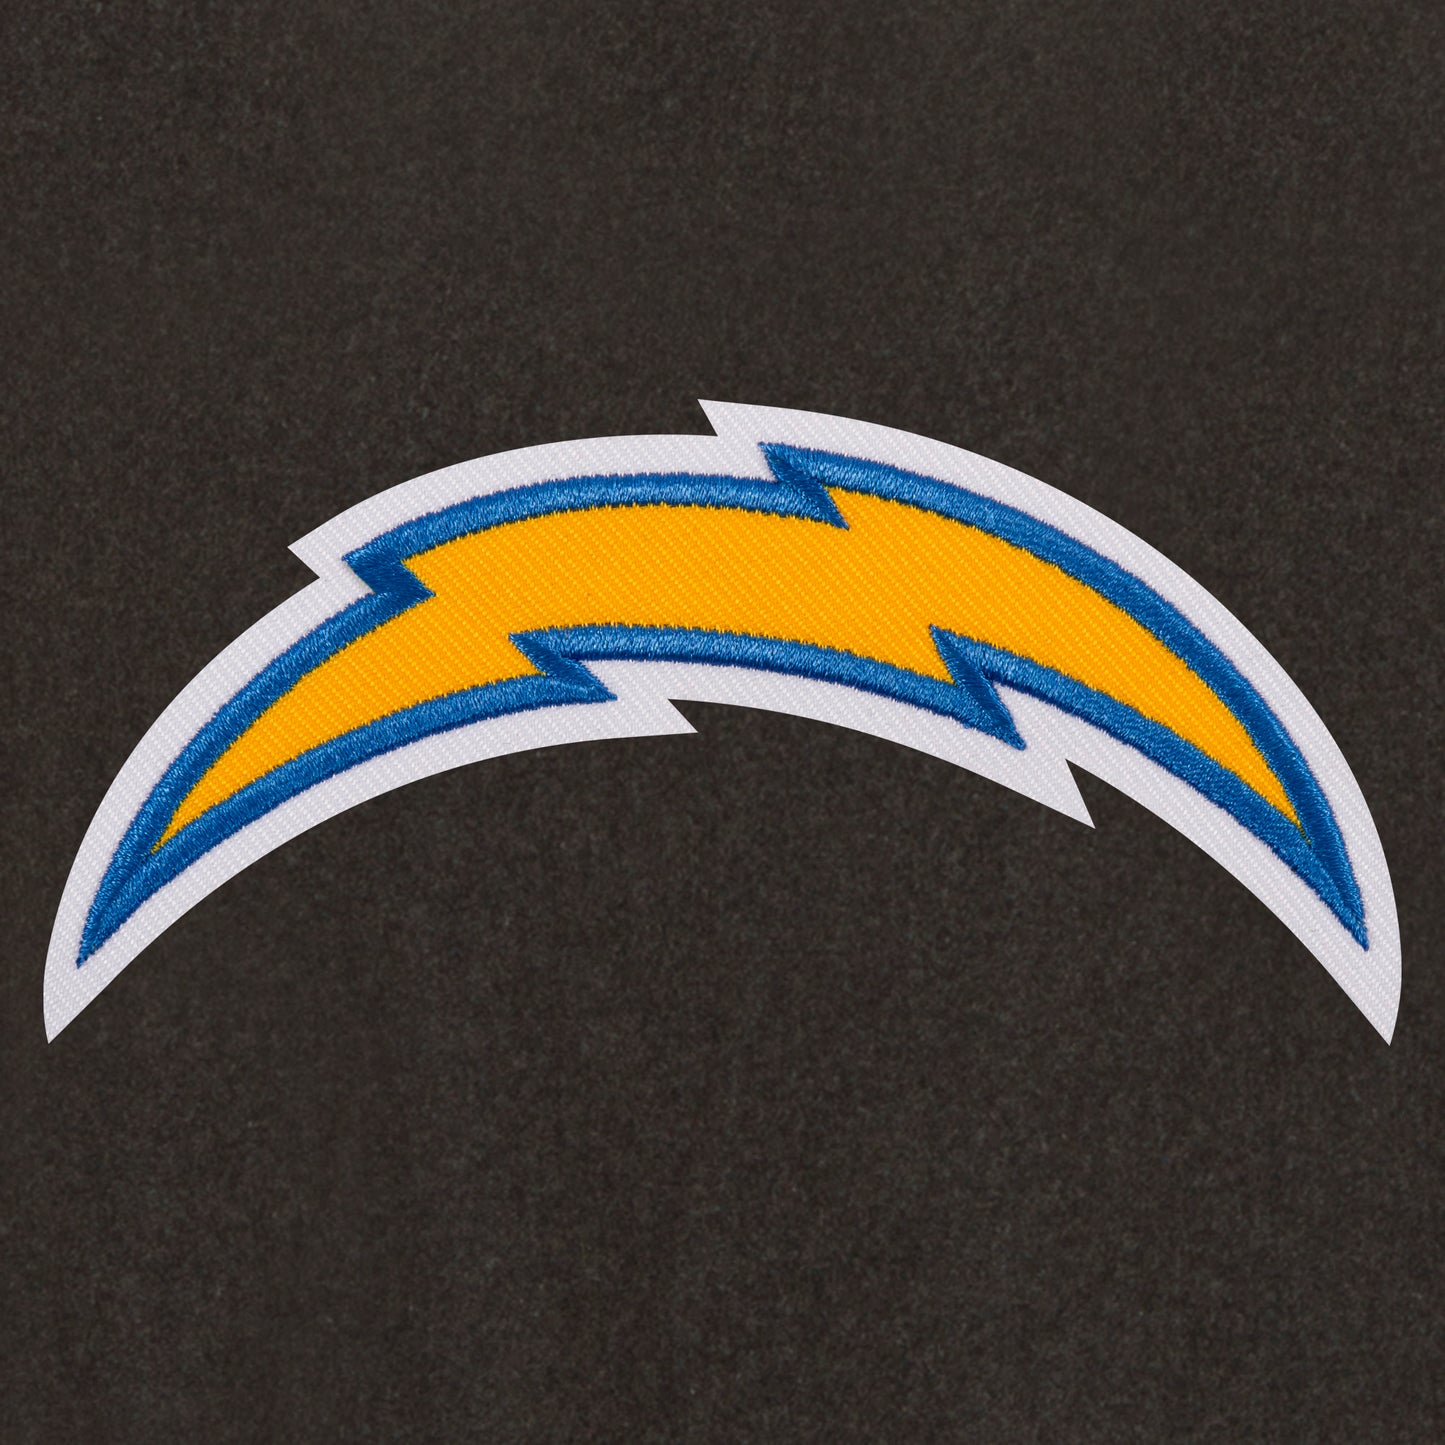 Los Angeles Chargers Reversible Wool and Leather Jacket